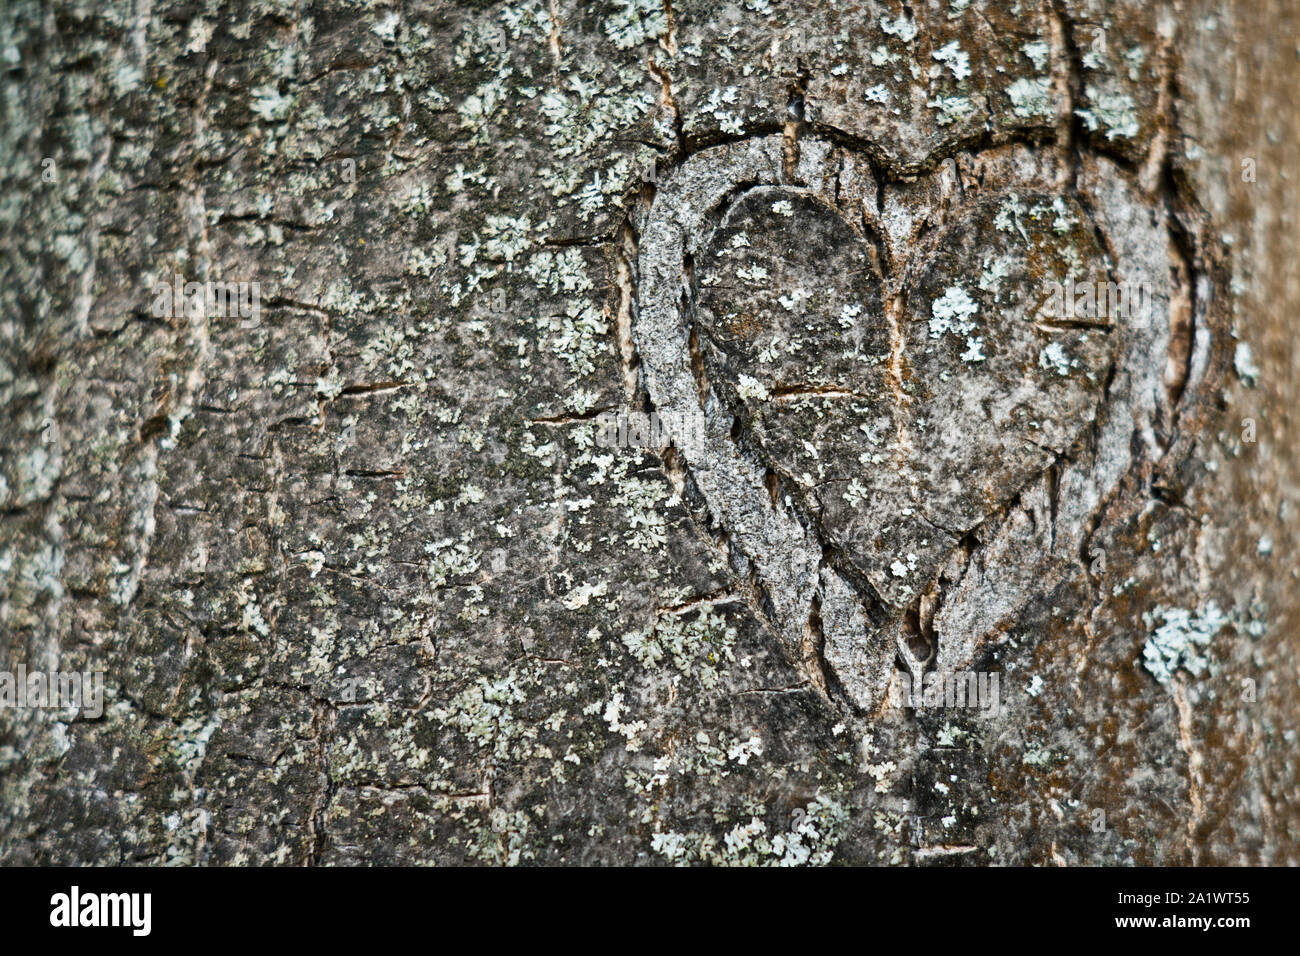 heart shape carved on a tree, love concept Stock Photo